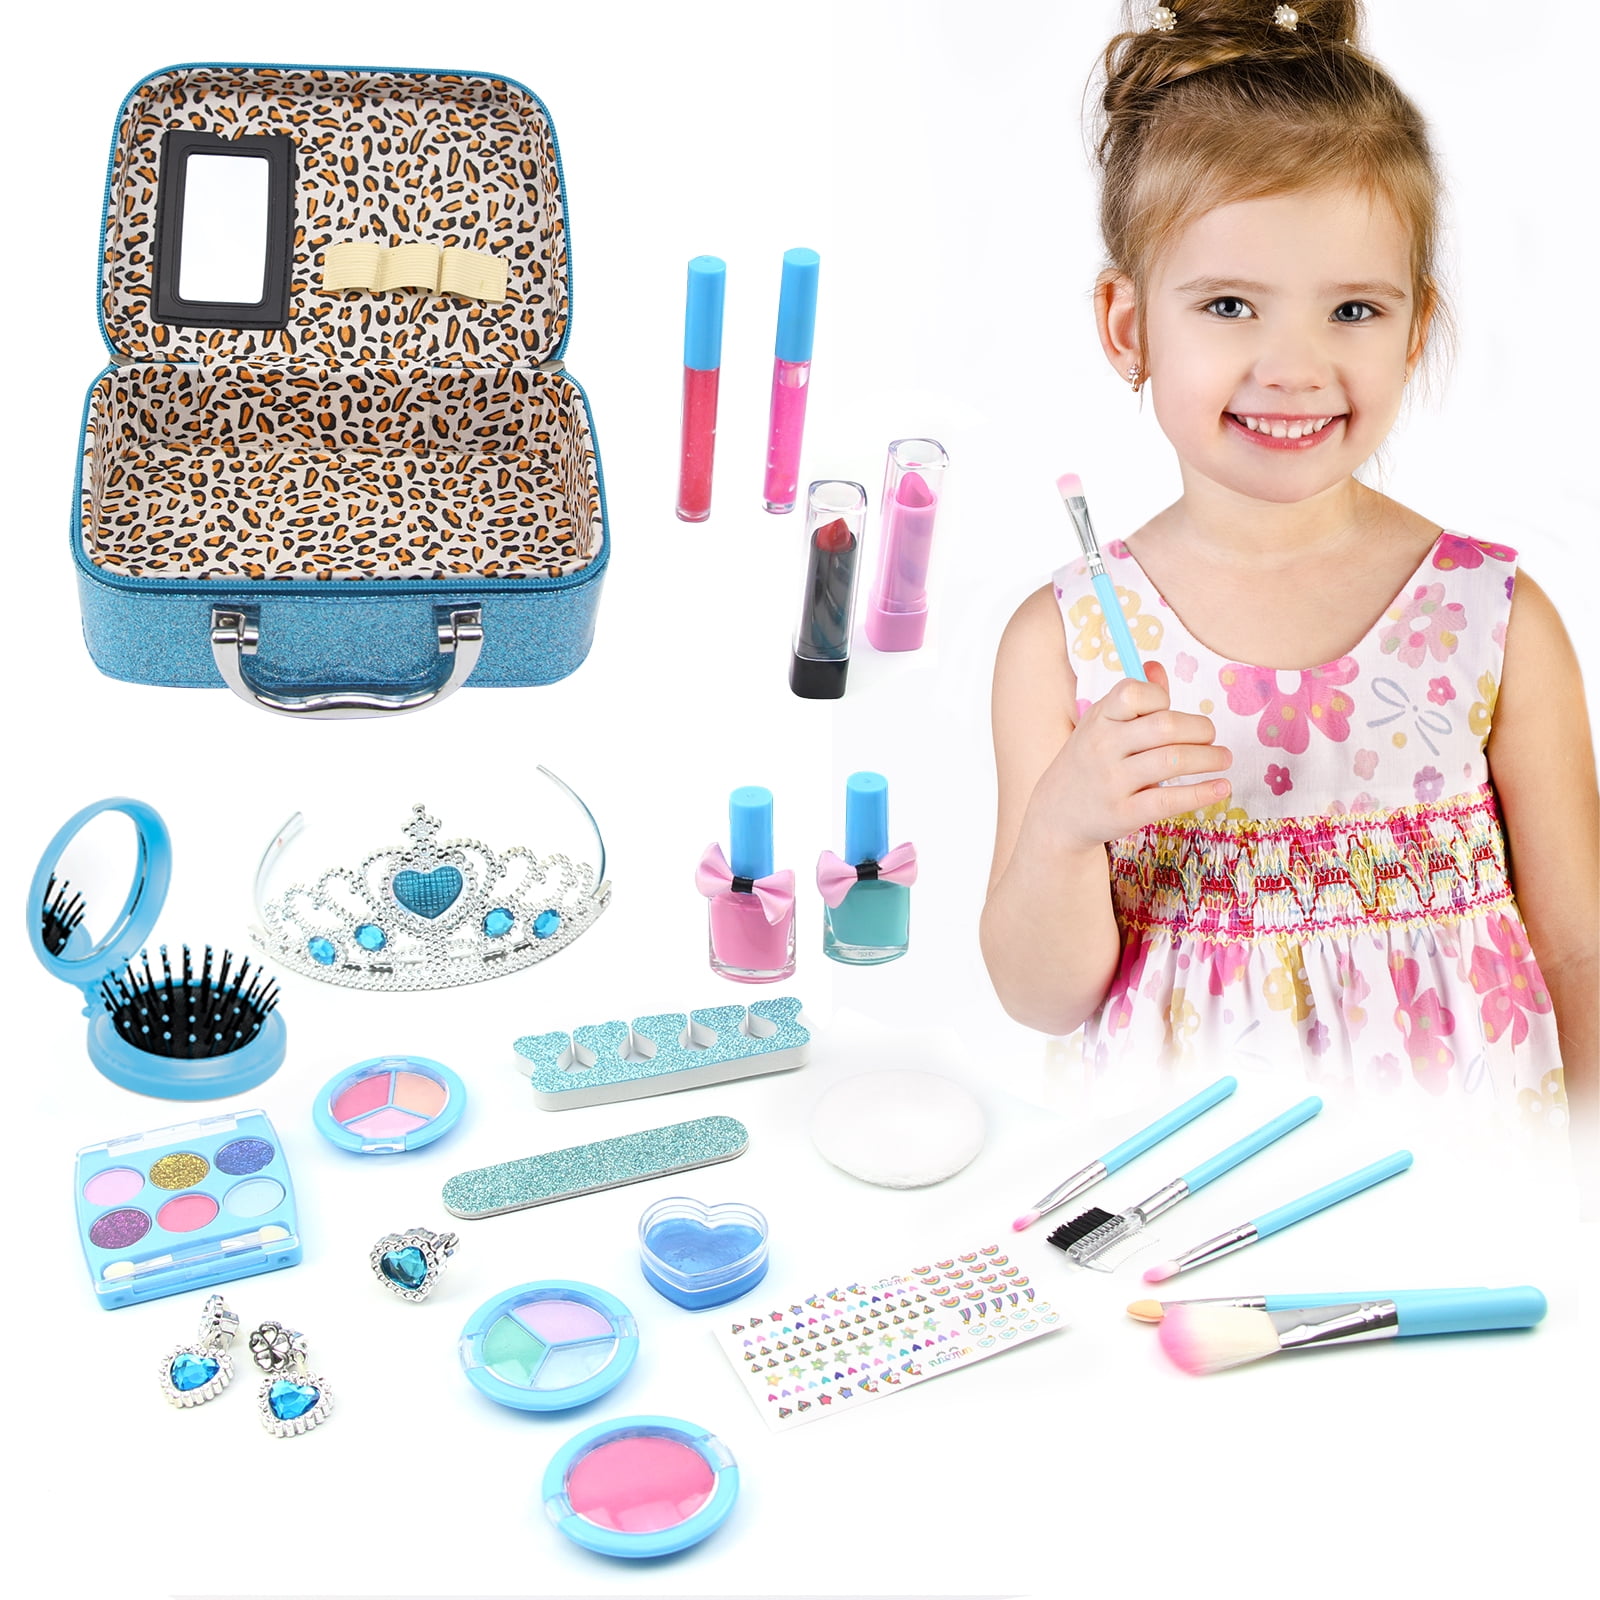 18 Pcs Makeup Toy Set, Real Kids Cosmetic Beauty Toys with Cosmetic Bag,  Washable Make Up Kits for G…See more 18 Pcs Makeup Toy Set, Real Kids